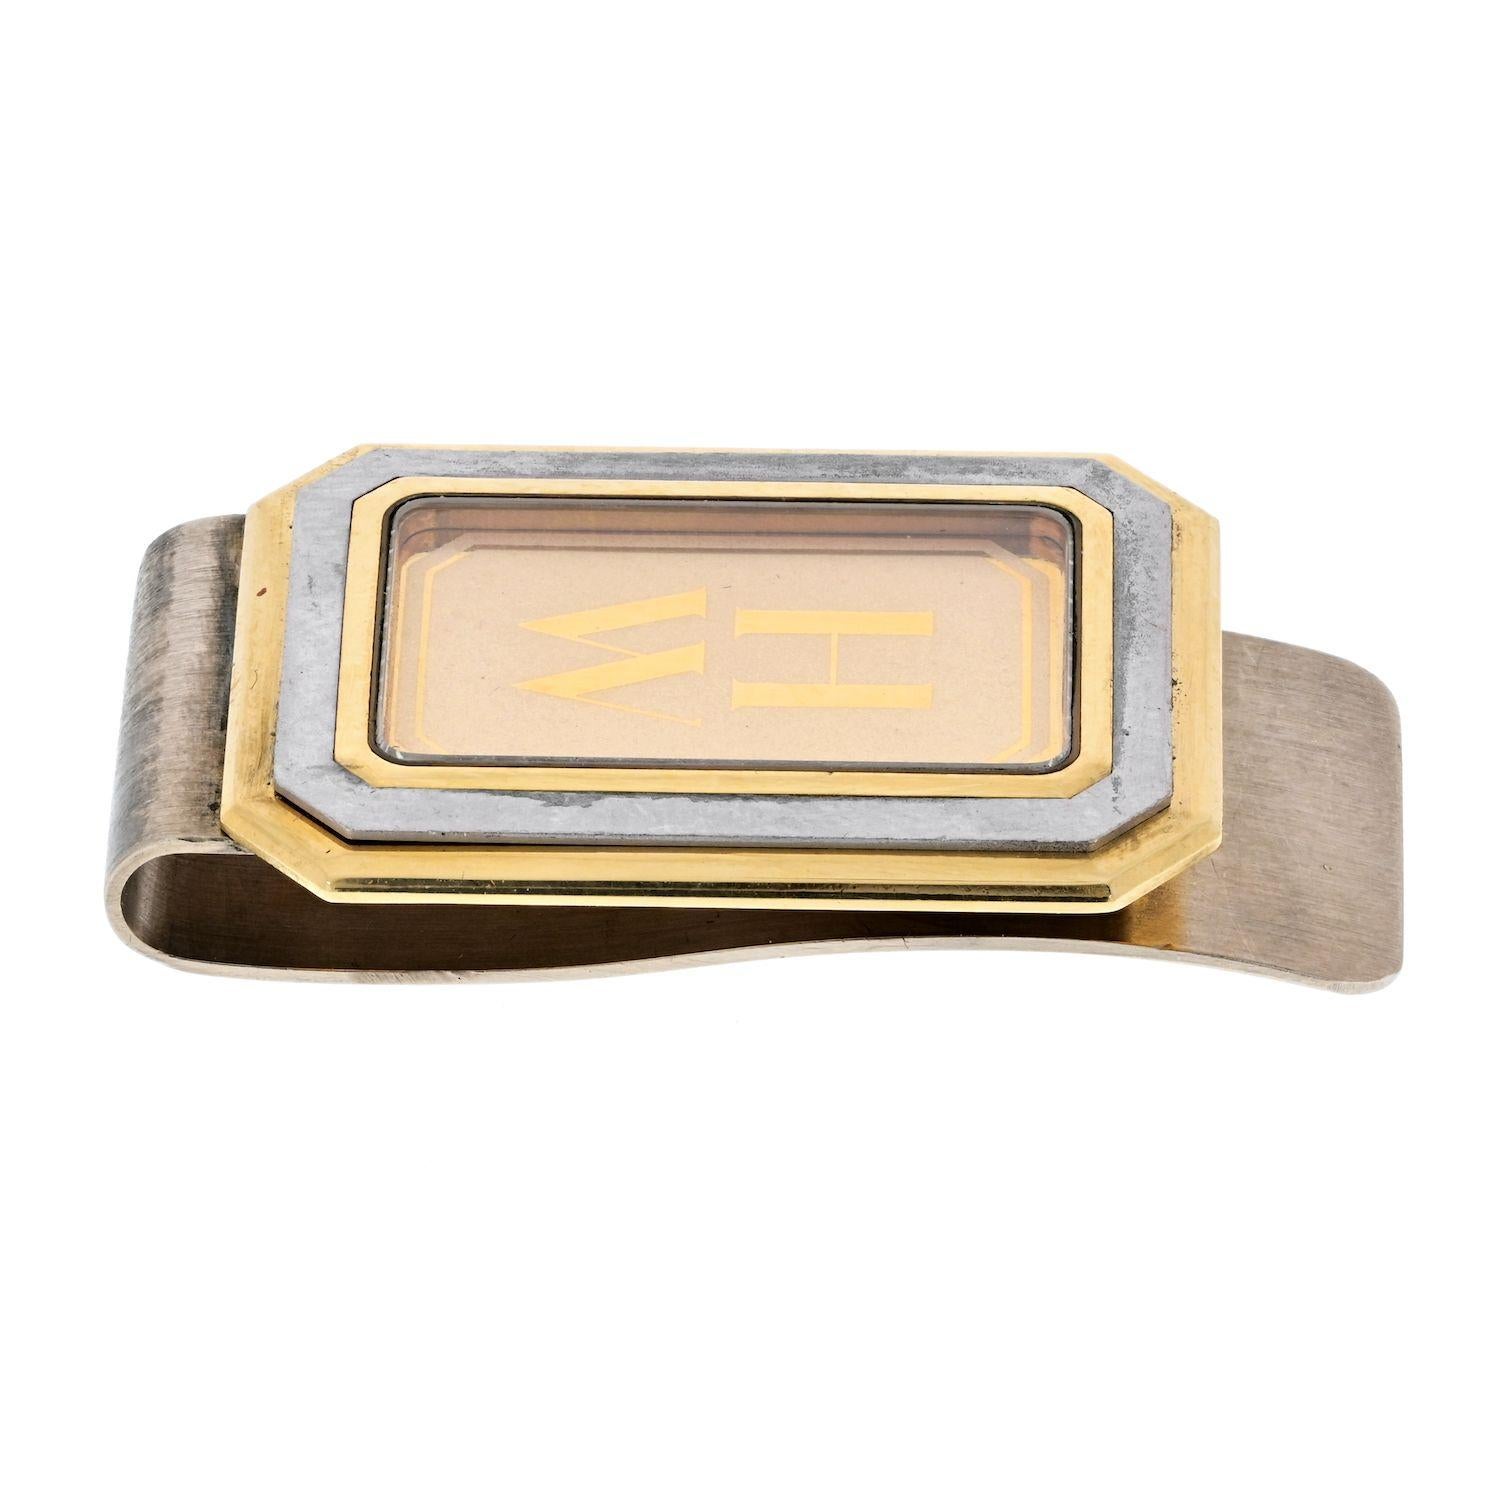 Perfect gift for a groom or your husband: classic and elegant HW yellow gold money clip. Vintage find that we know will be loved by someone who appriciates vintage signed jewelry and quality gold gifts. About 3cm long.